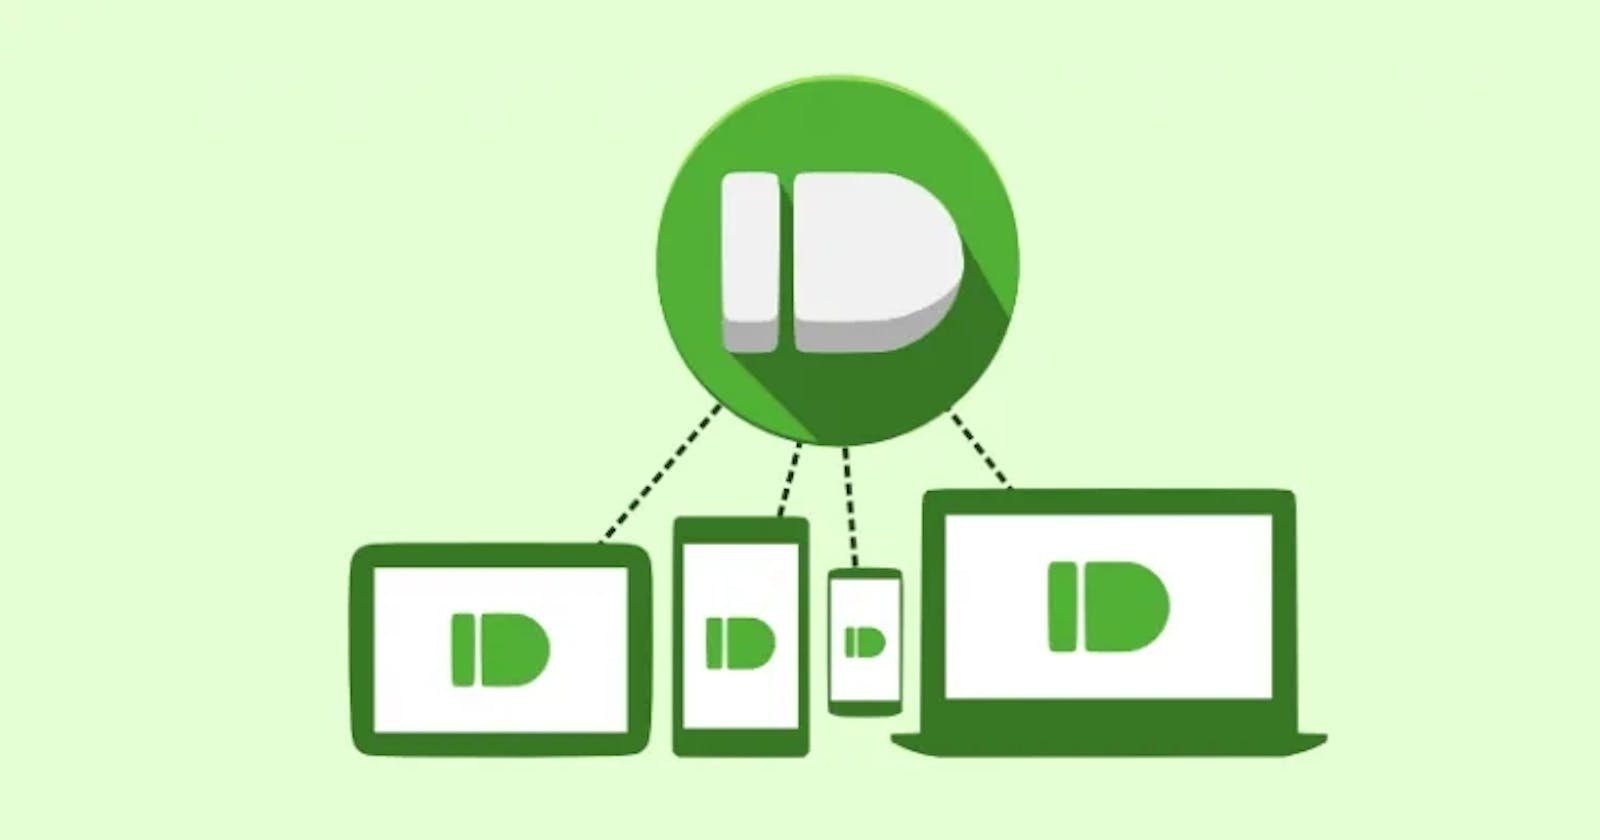 Build (quickly) your own mobile notifications service with Pushbullet and Node.js